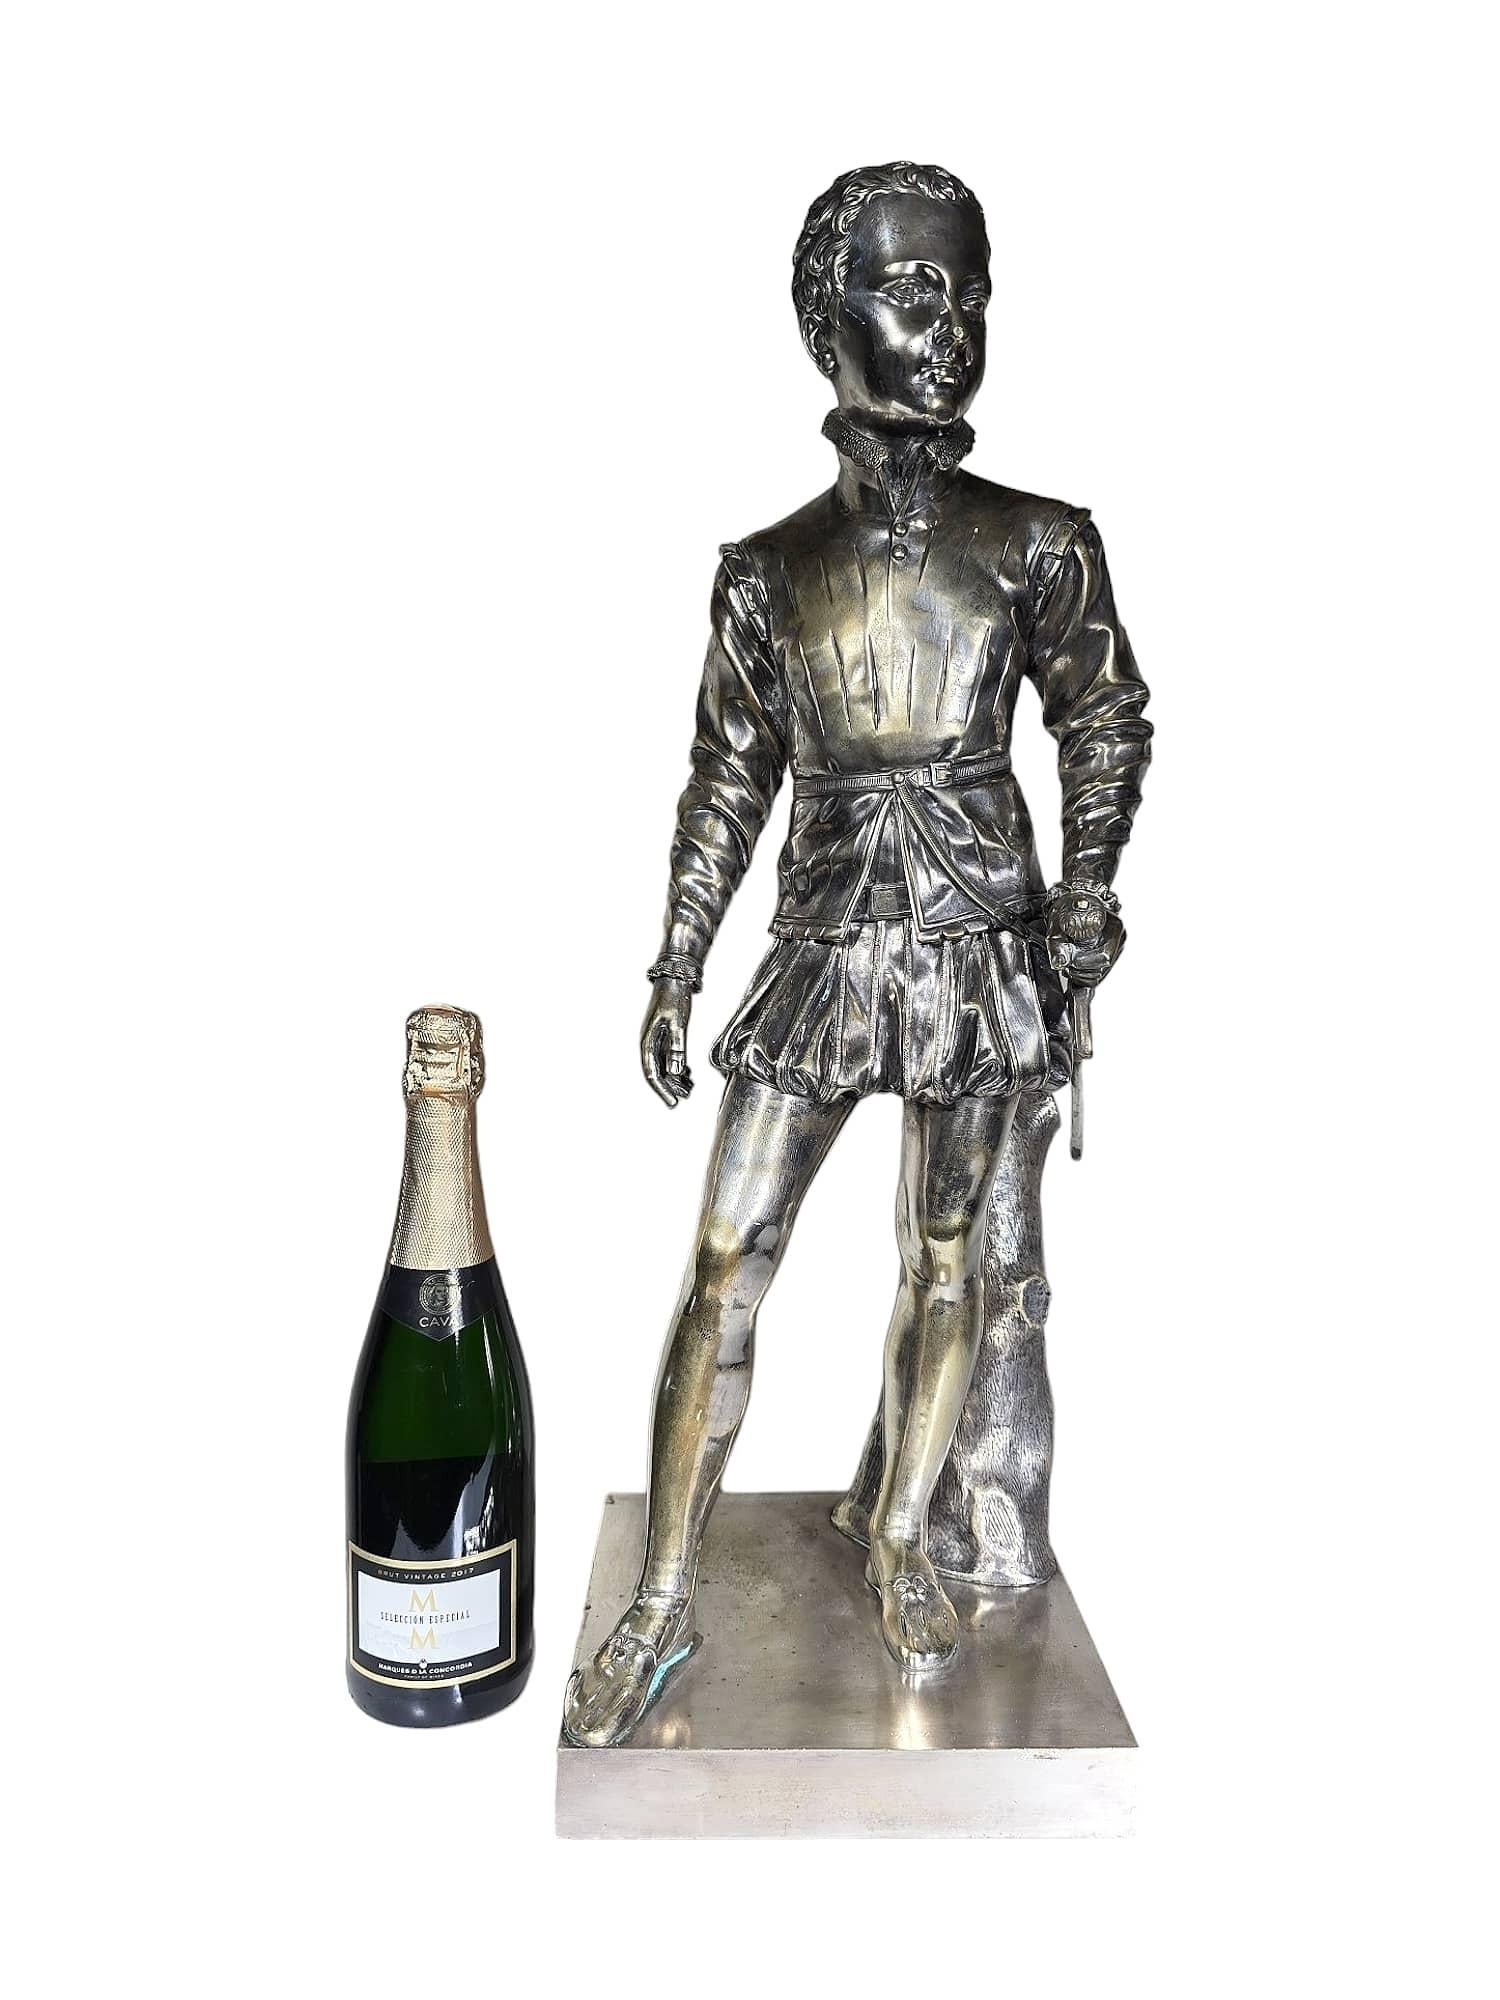 
Discover the majesty of the King of France, Henry IV, with this impressive sculpture!

This elegant sculpture, made of silver-plated bronze from the 19th century, pays tribute to one of the most iconic monarchs in French history. With excellent